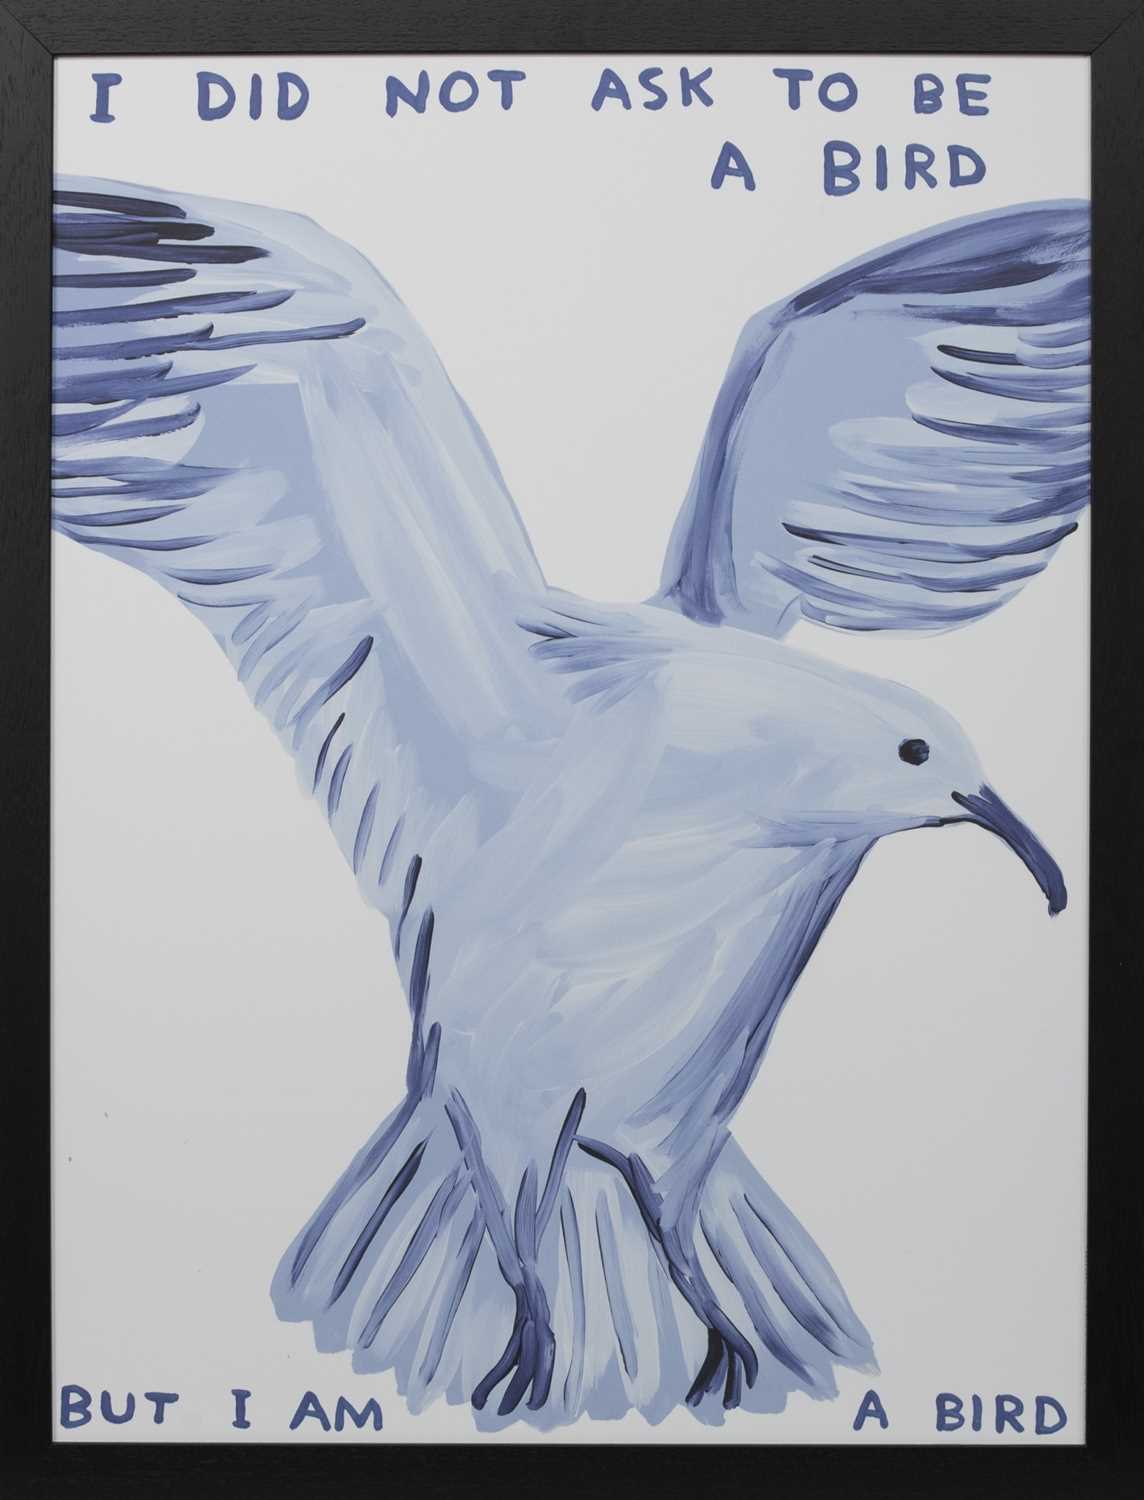 Lot 65 - I DID NOT ASK TO BE A BIRD, A LITHOGRAPH BY DAVID SHRIGLEY